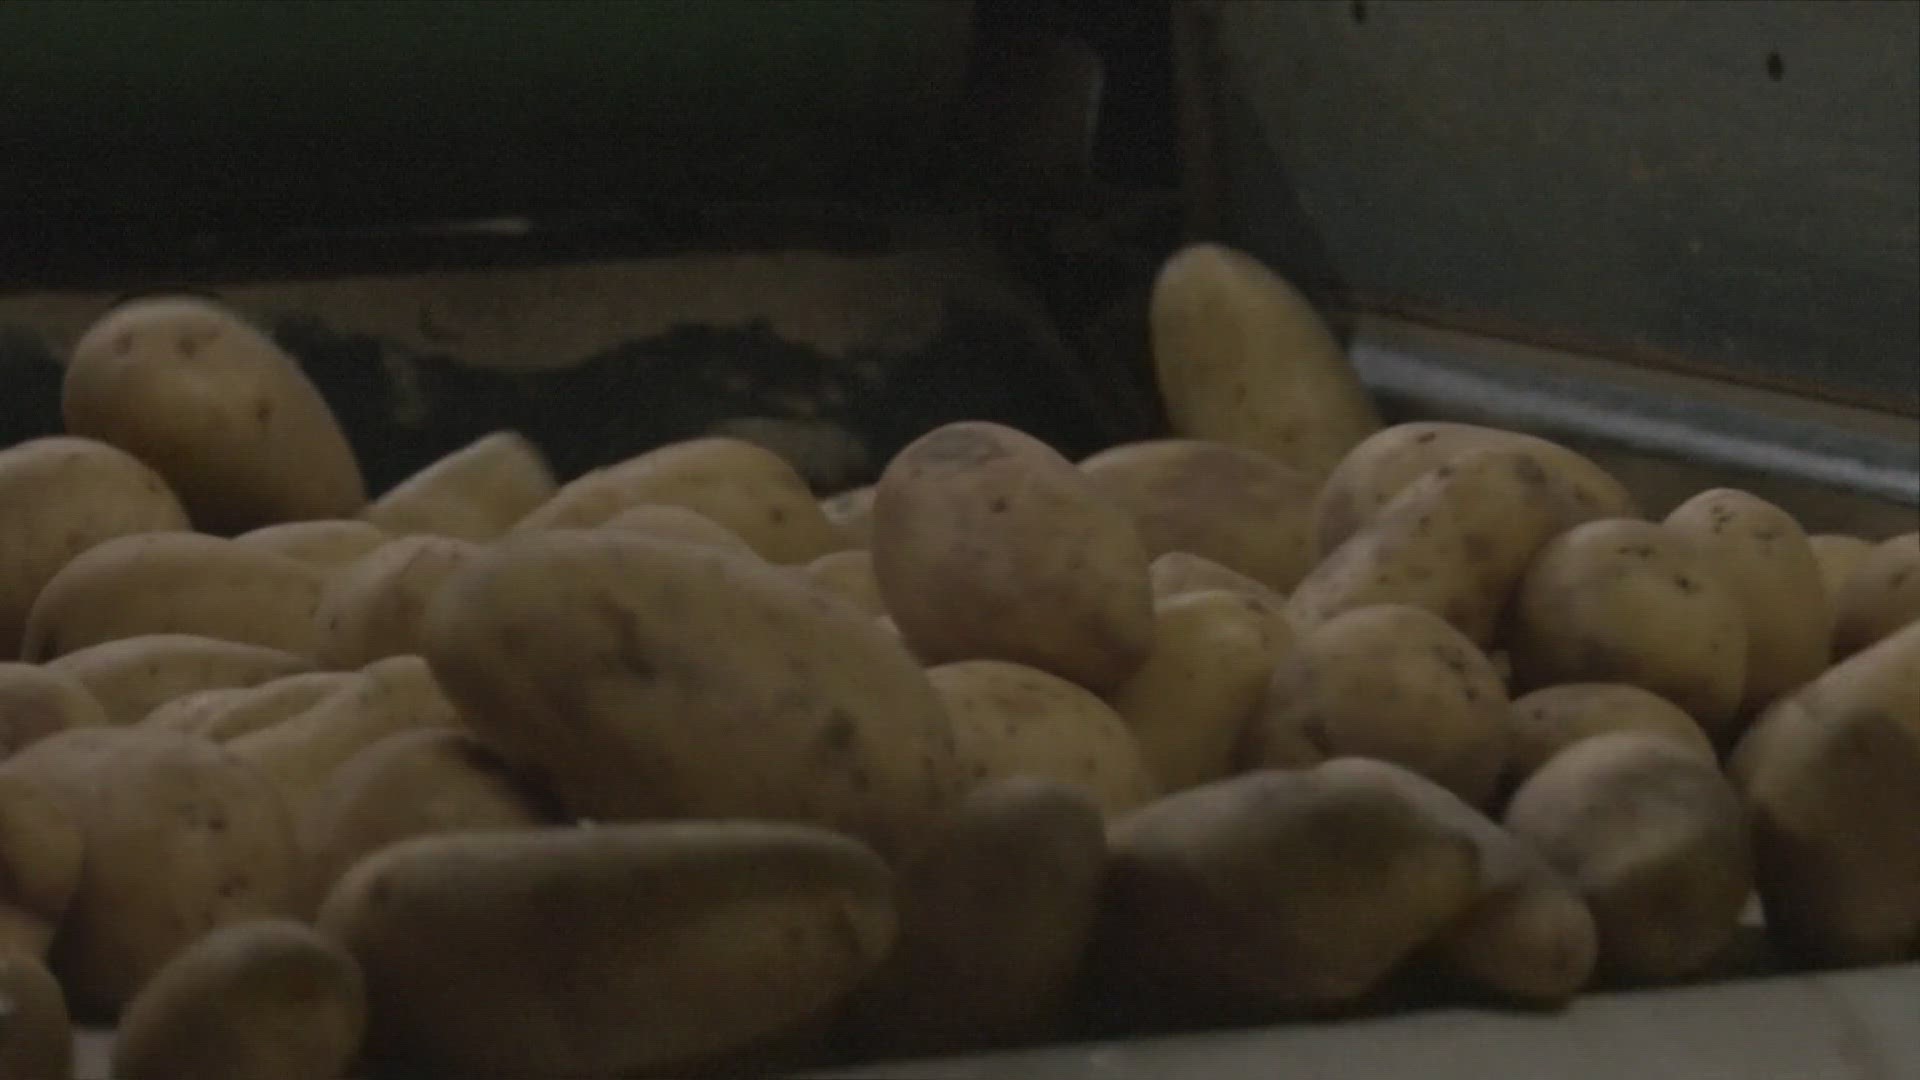 A farmer at the event says he expects his farm to supply 13 tons of potatoes for the Olympics